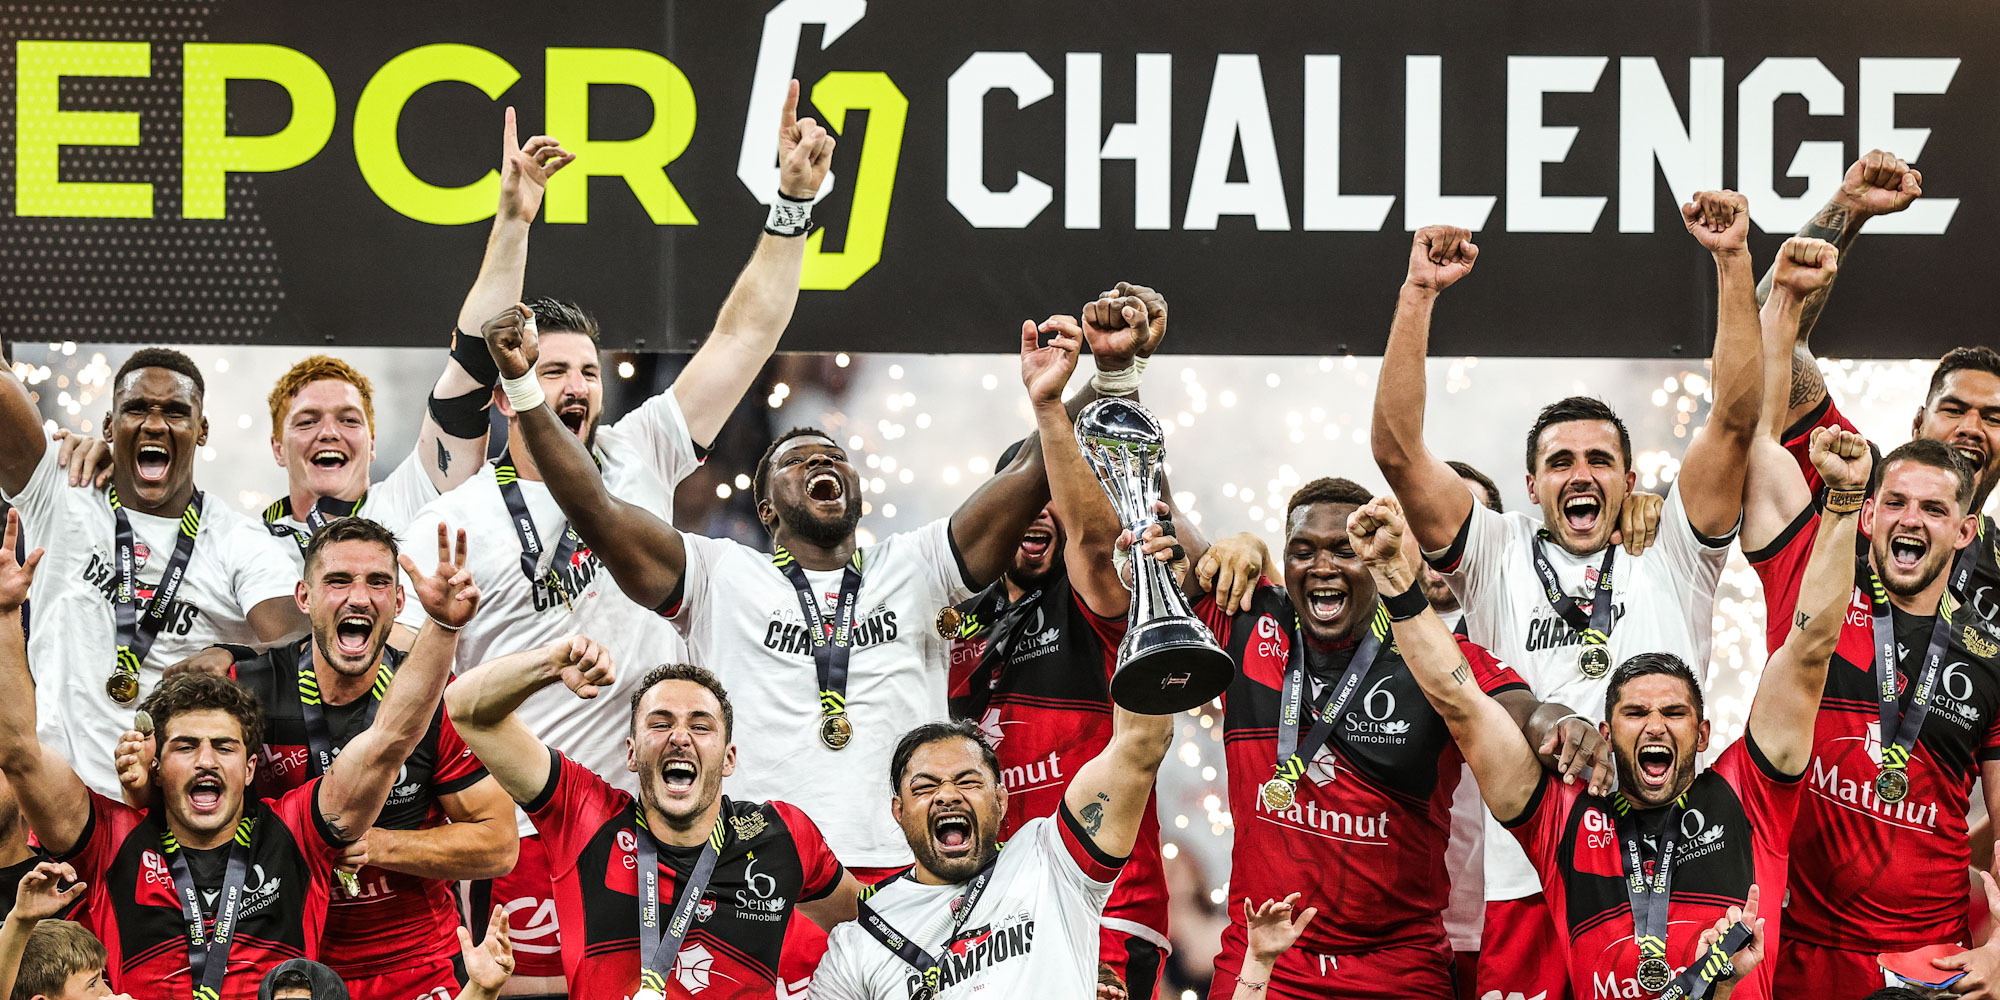 Lyon will be defending their EPCR Challenge Cup title this season.